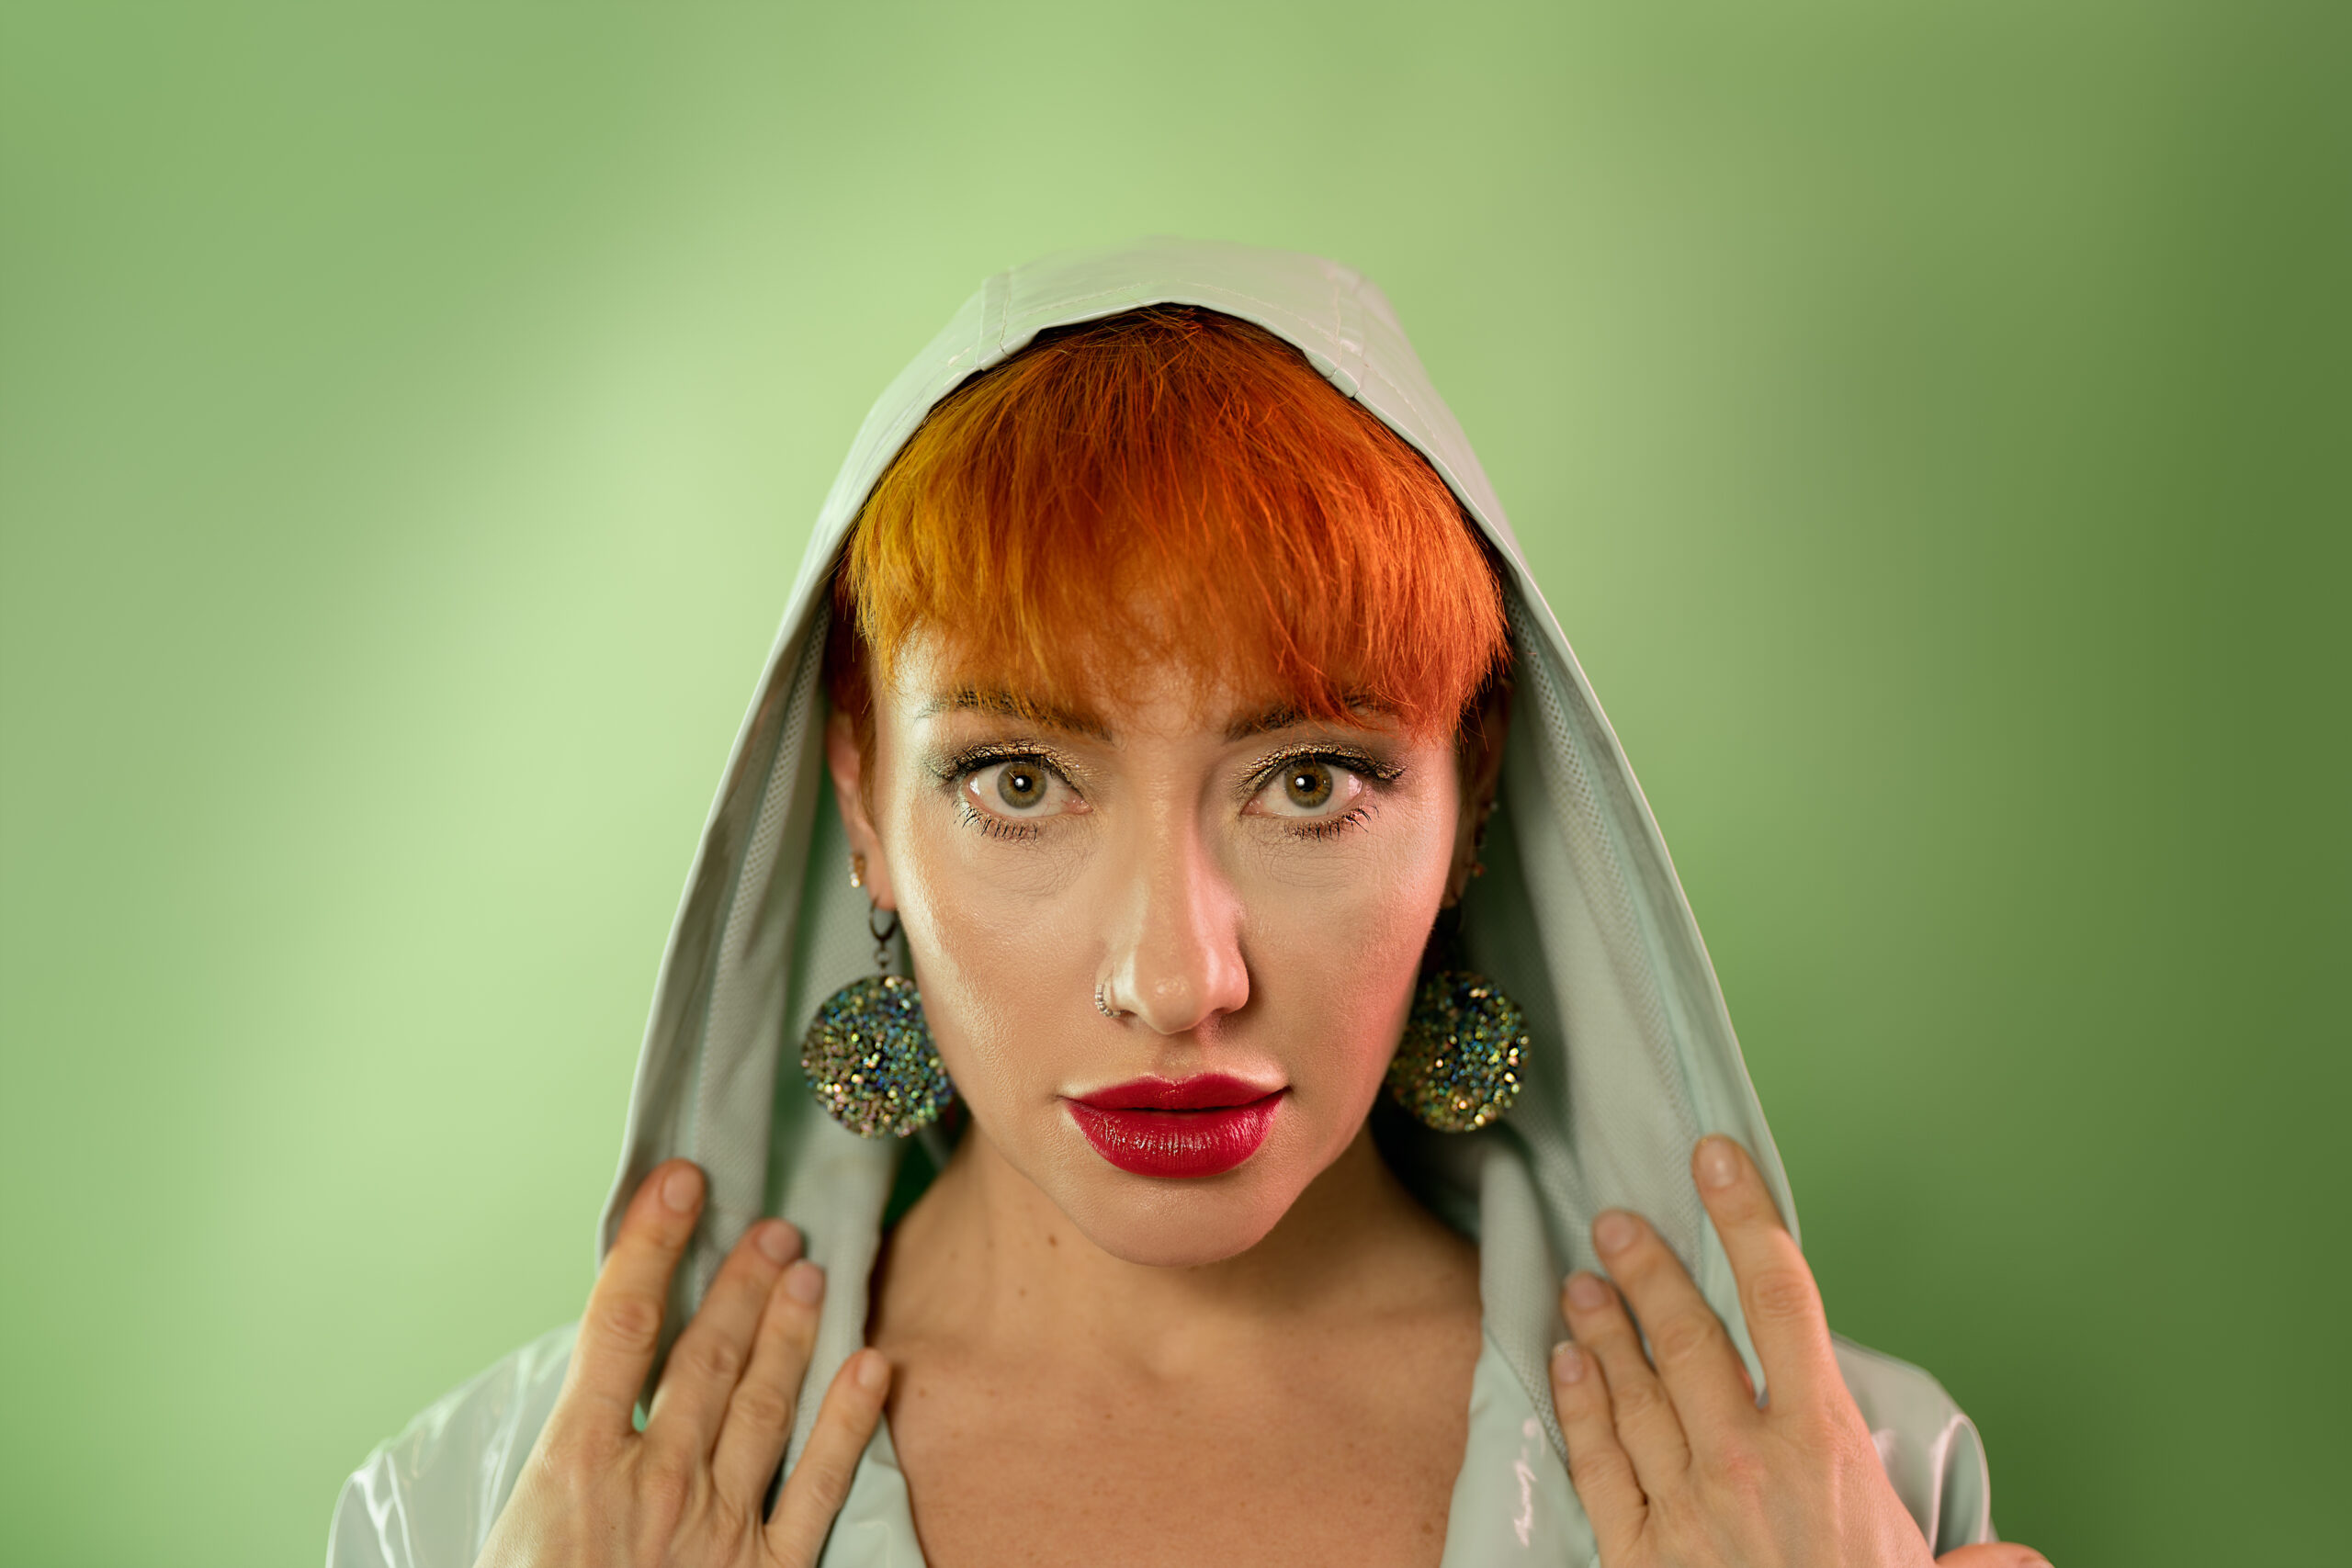 Image is green on green, featuring ahead and shoulders shot of Liliya, a model with red/orange hair in a green mac against a green background